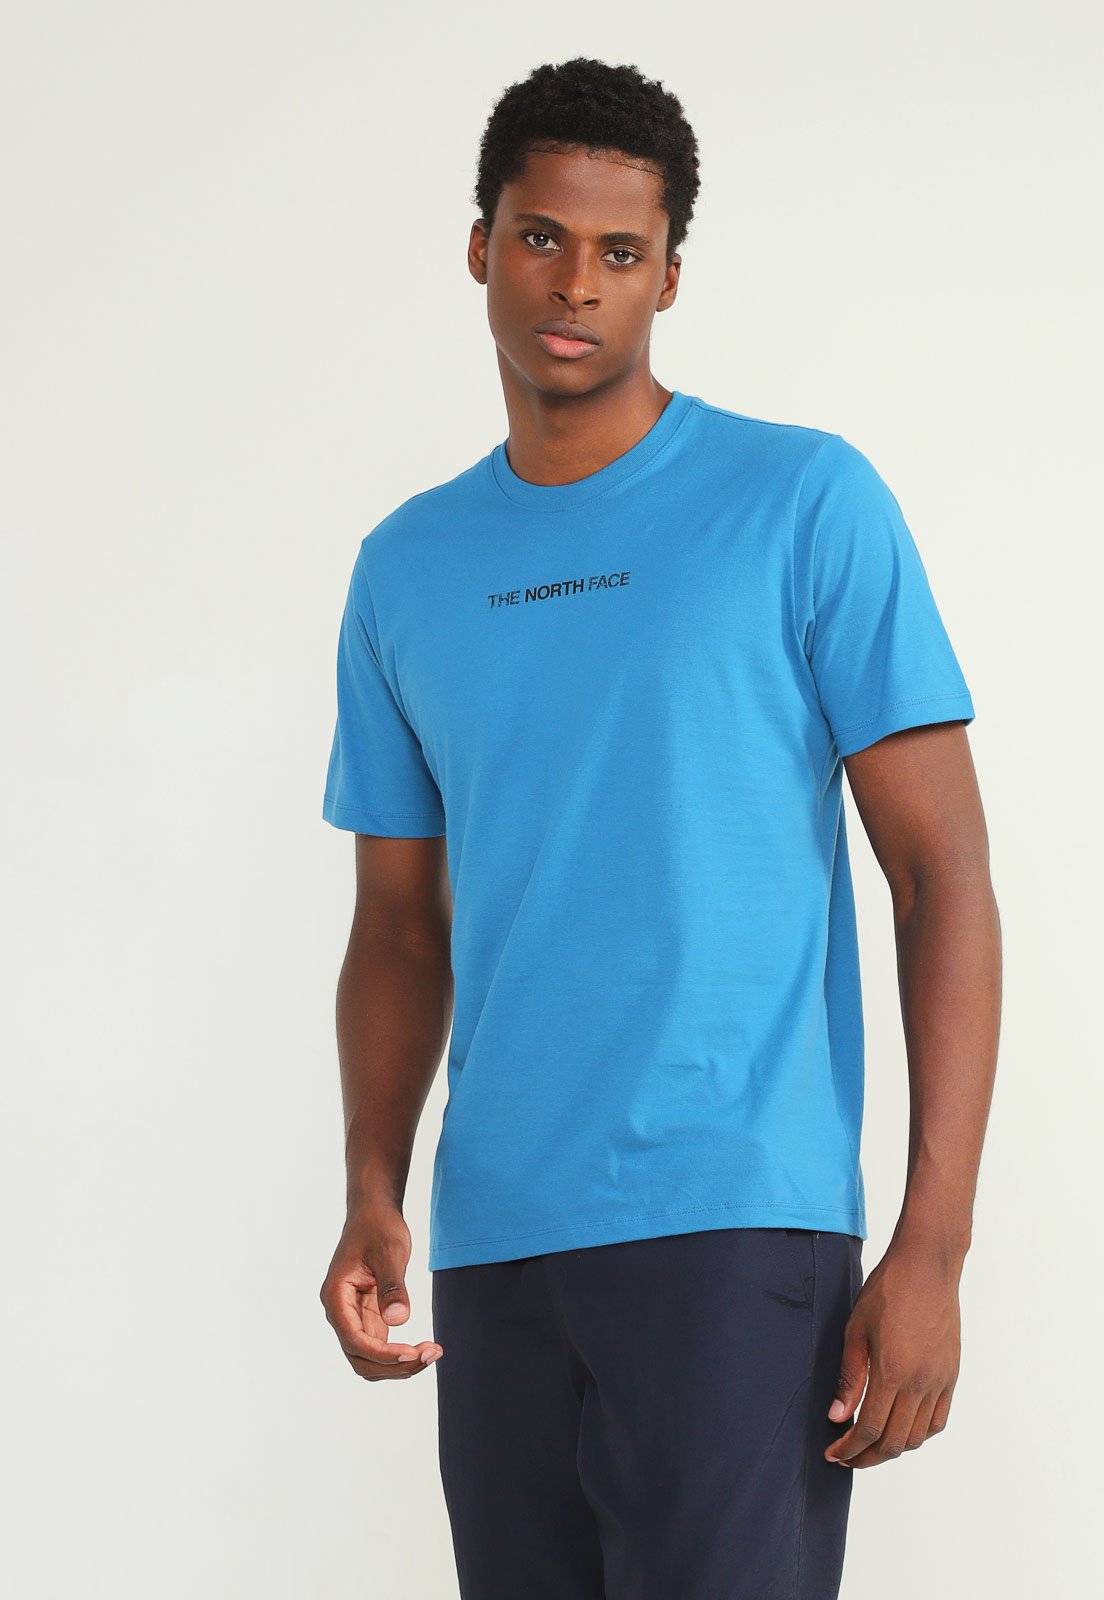 The north face Camiseta The North Face Easy Azul